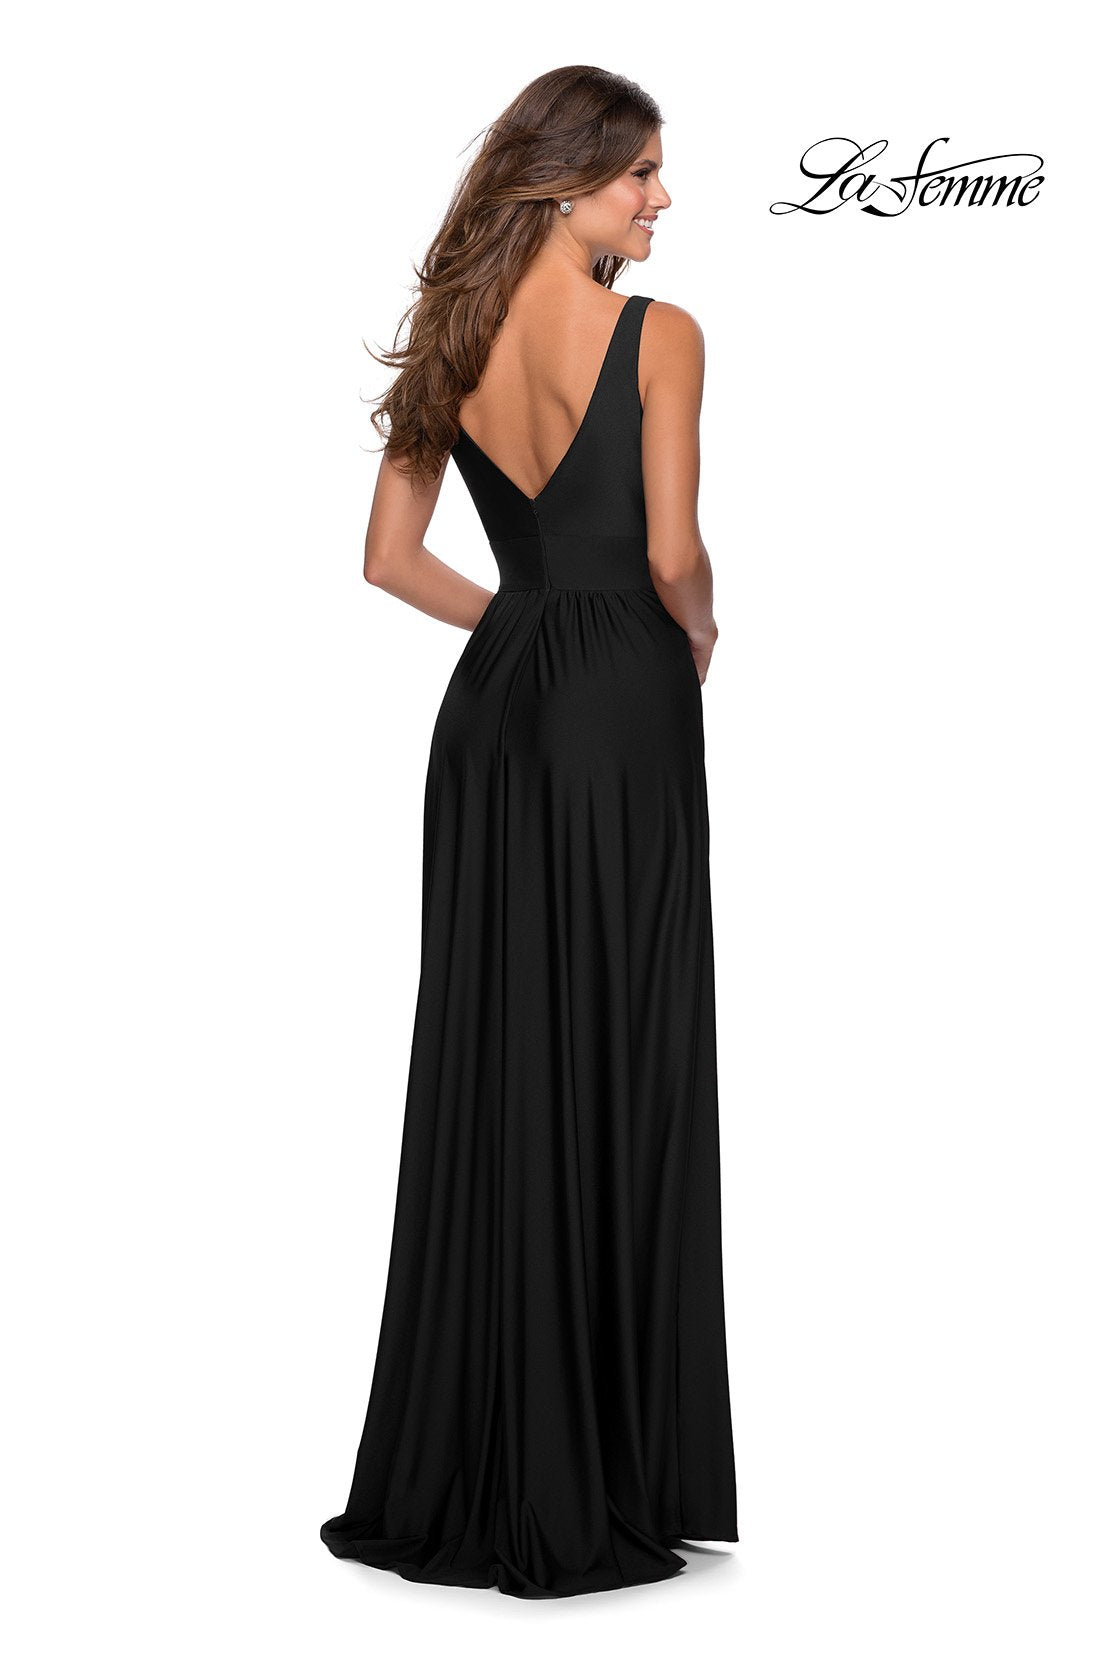 La Femme 28547 dress images in these colors: Black, Dark Berry, Mauve, Nude, Silver.